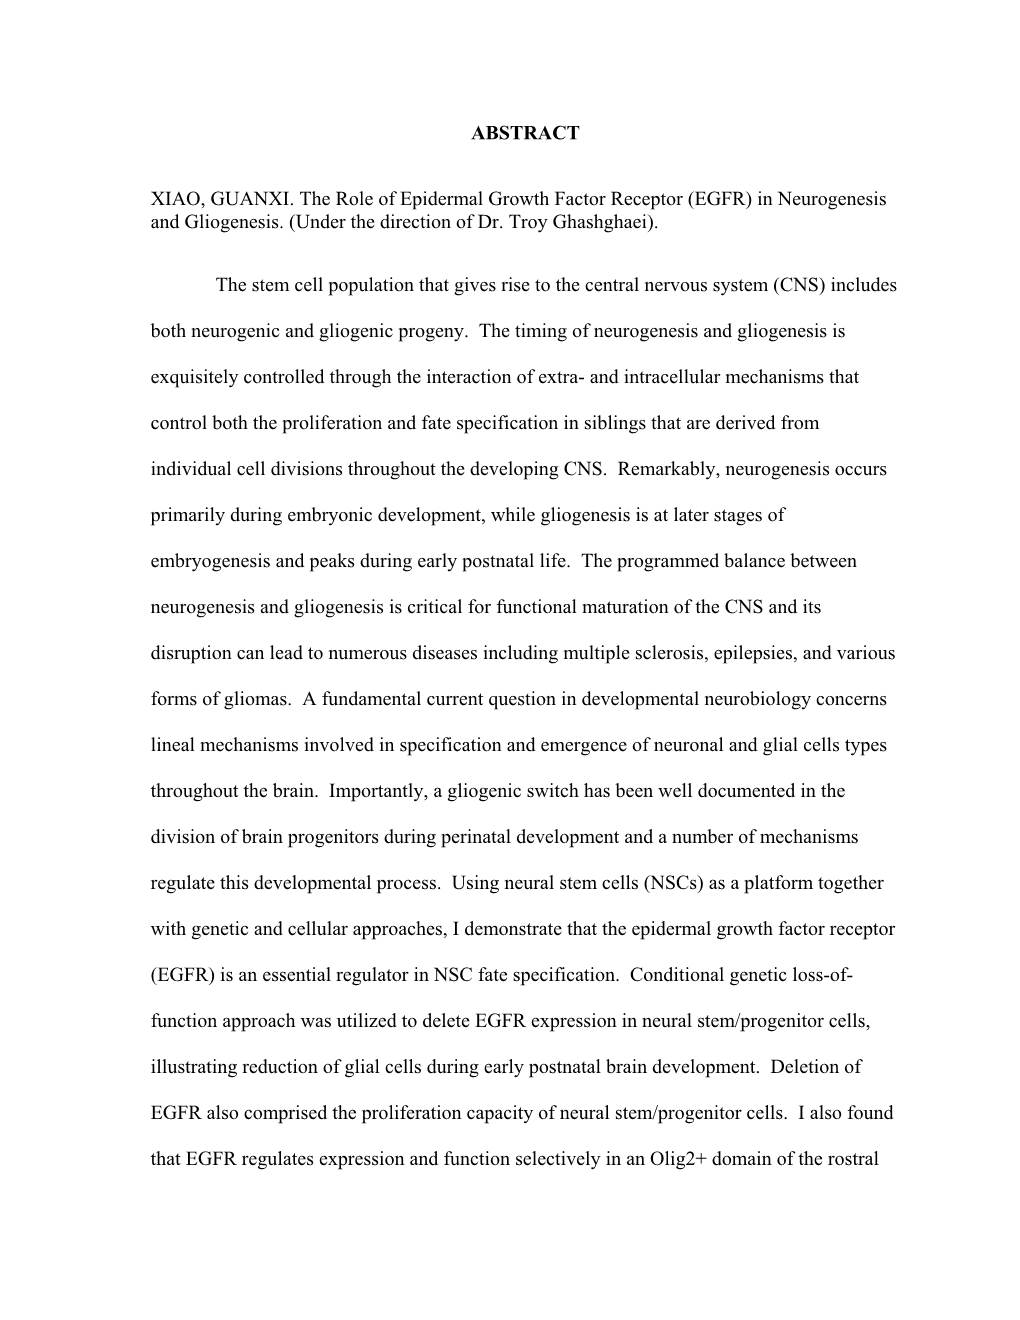 ABSTRACT XIAO, GUANXI. the Role of Epidermal Growth Factor Receptor (EGFR) in Neurogenesis and Gliogenesis. (Under the Direction